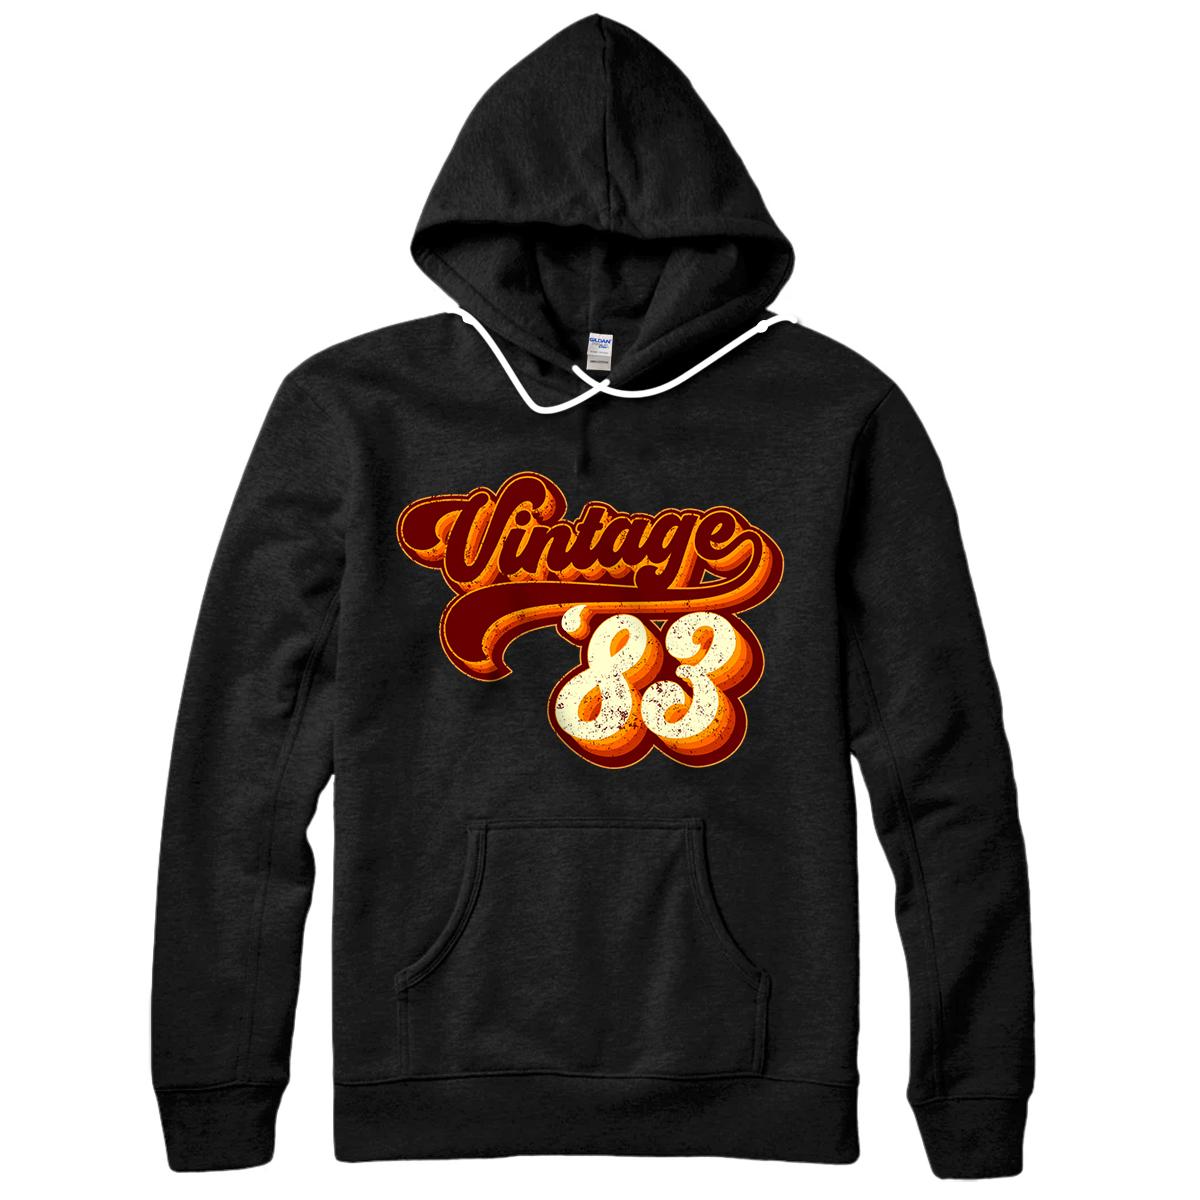 Personalized Vintage 1983 - 38th Birthday Pullover Hoodie